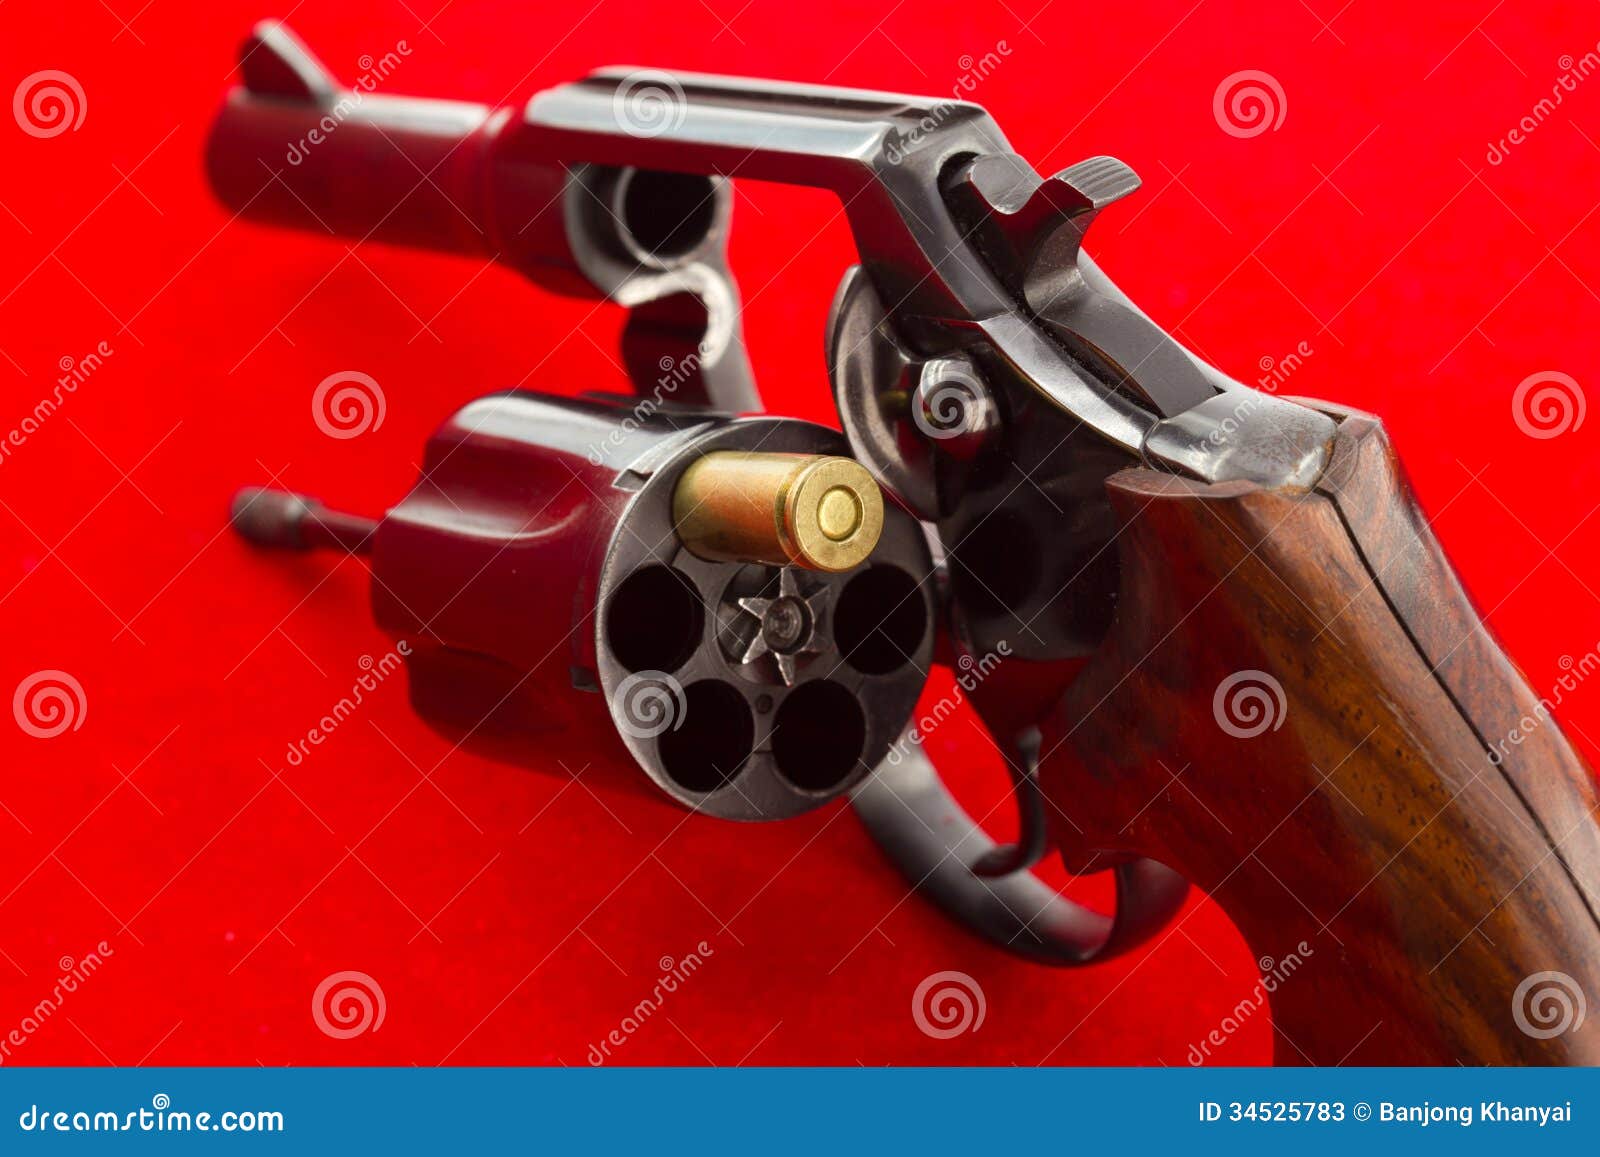 Russian roulette concept stock image. Image of business - 34525783